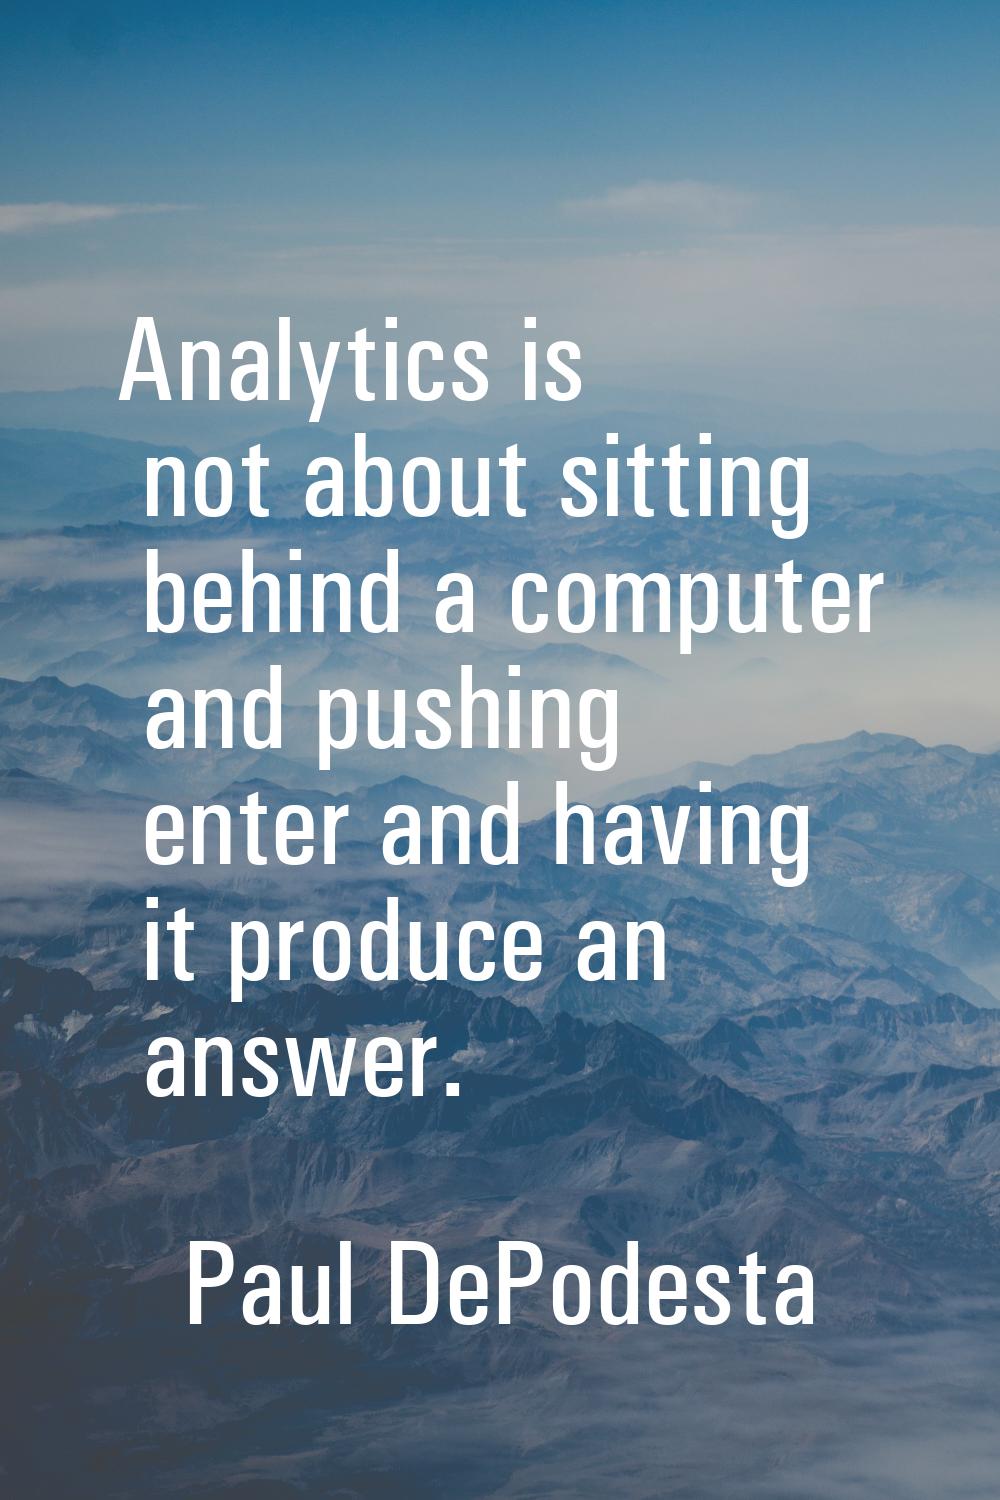 Analytics is not about sitting behind a computer and pushing enter and having it produce an answer.